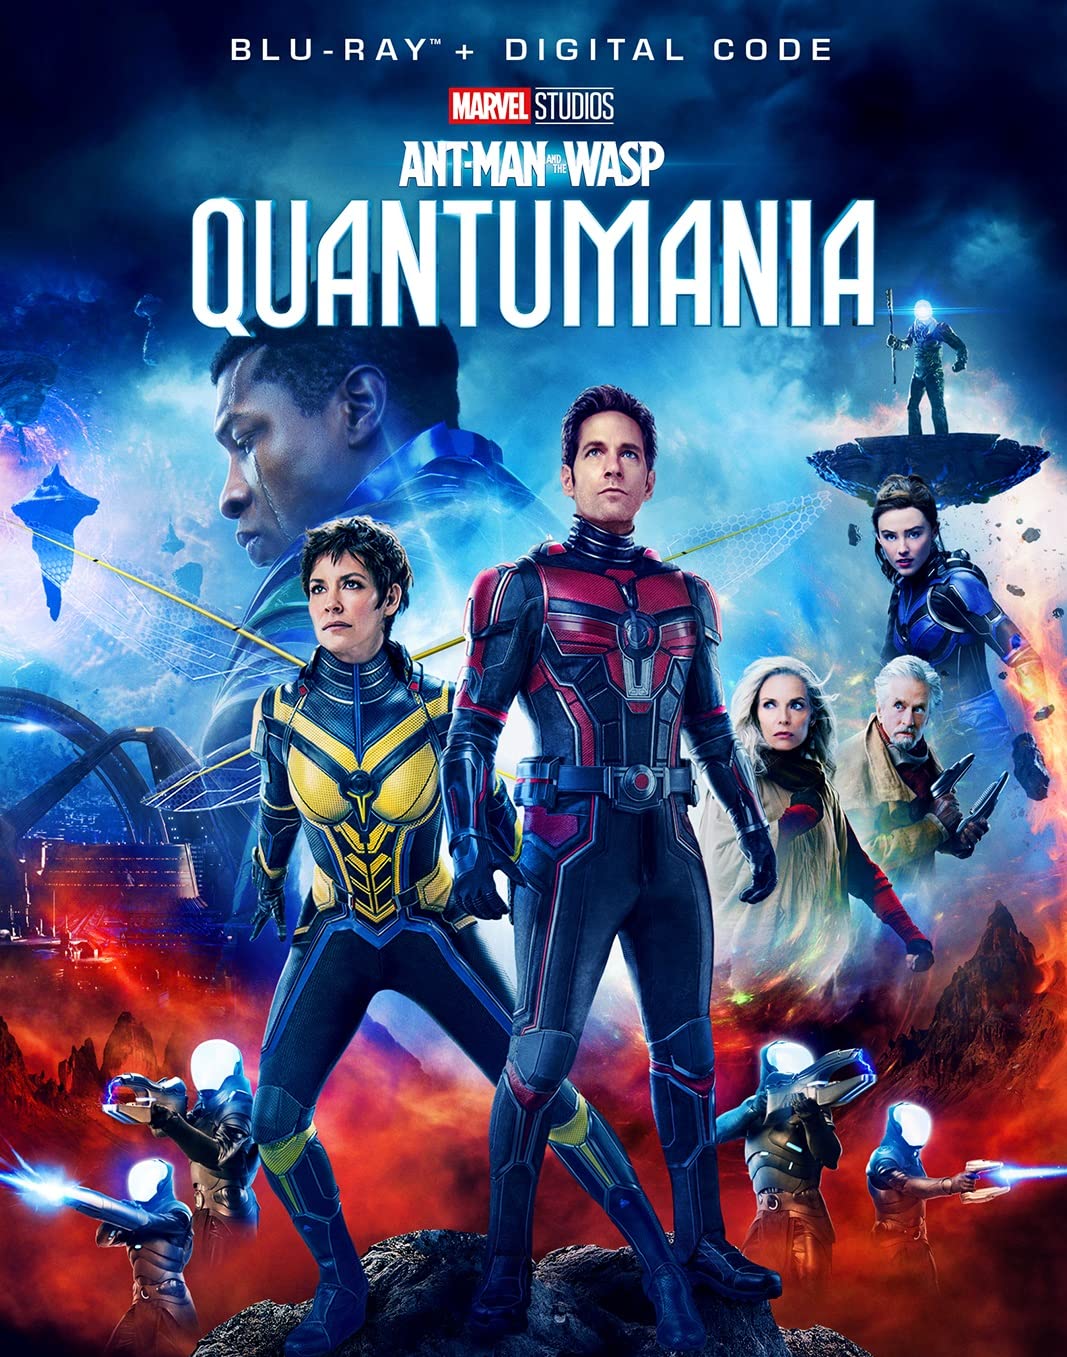 Ant-Man and the Wasp: Quantumania HD Code (Movies Anywhere)